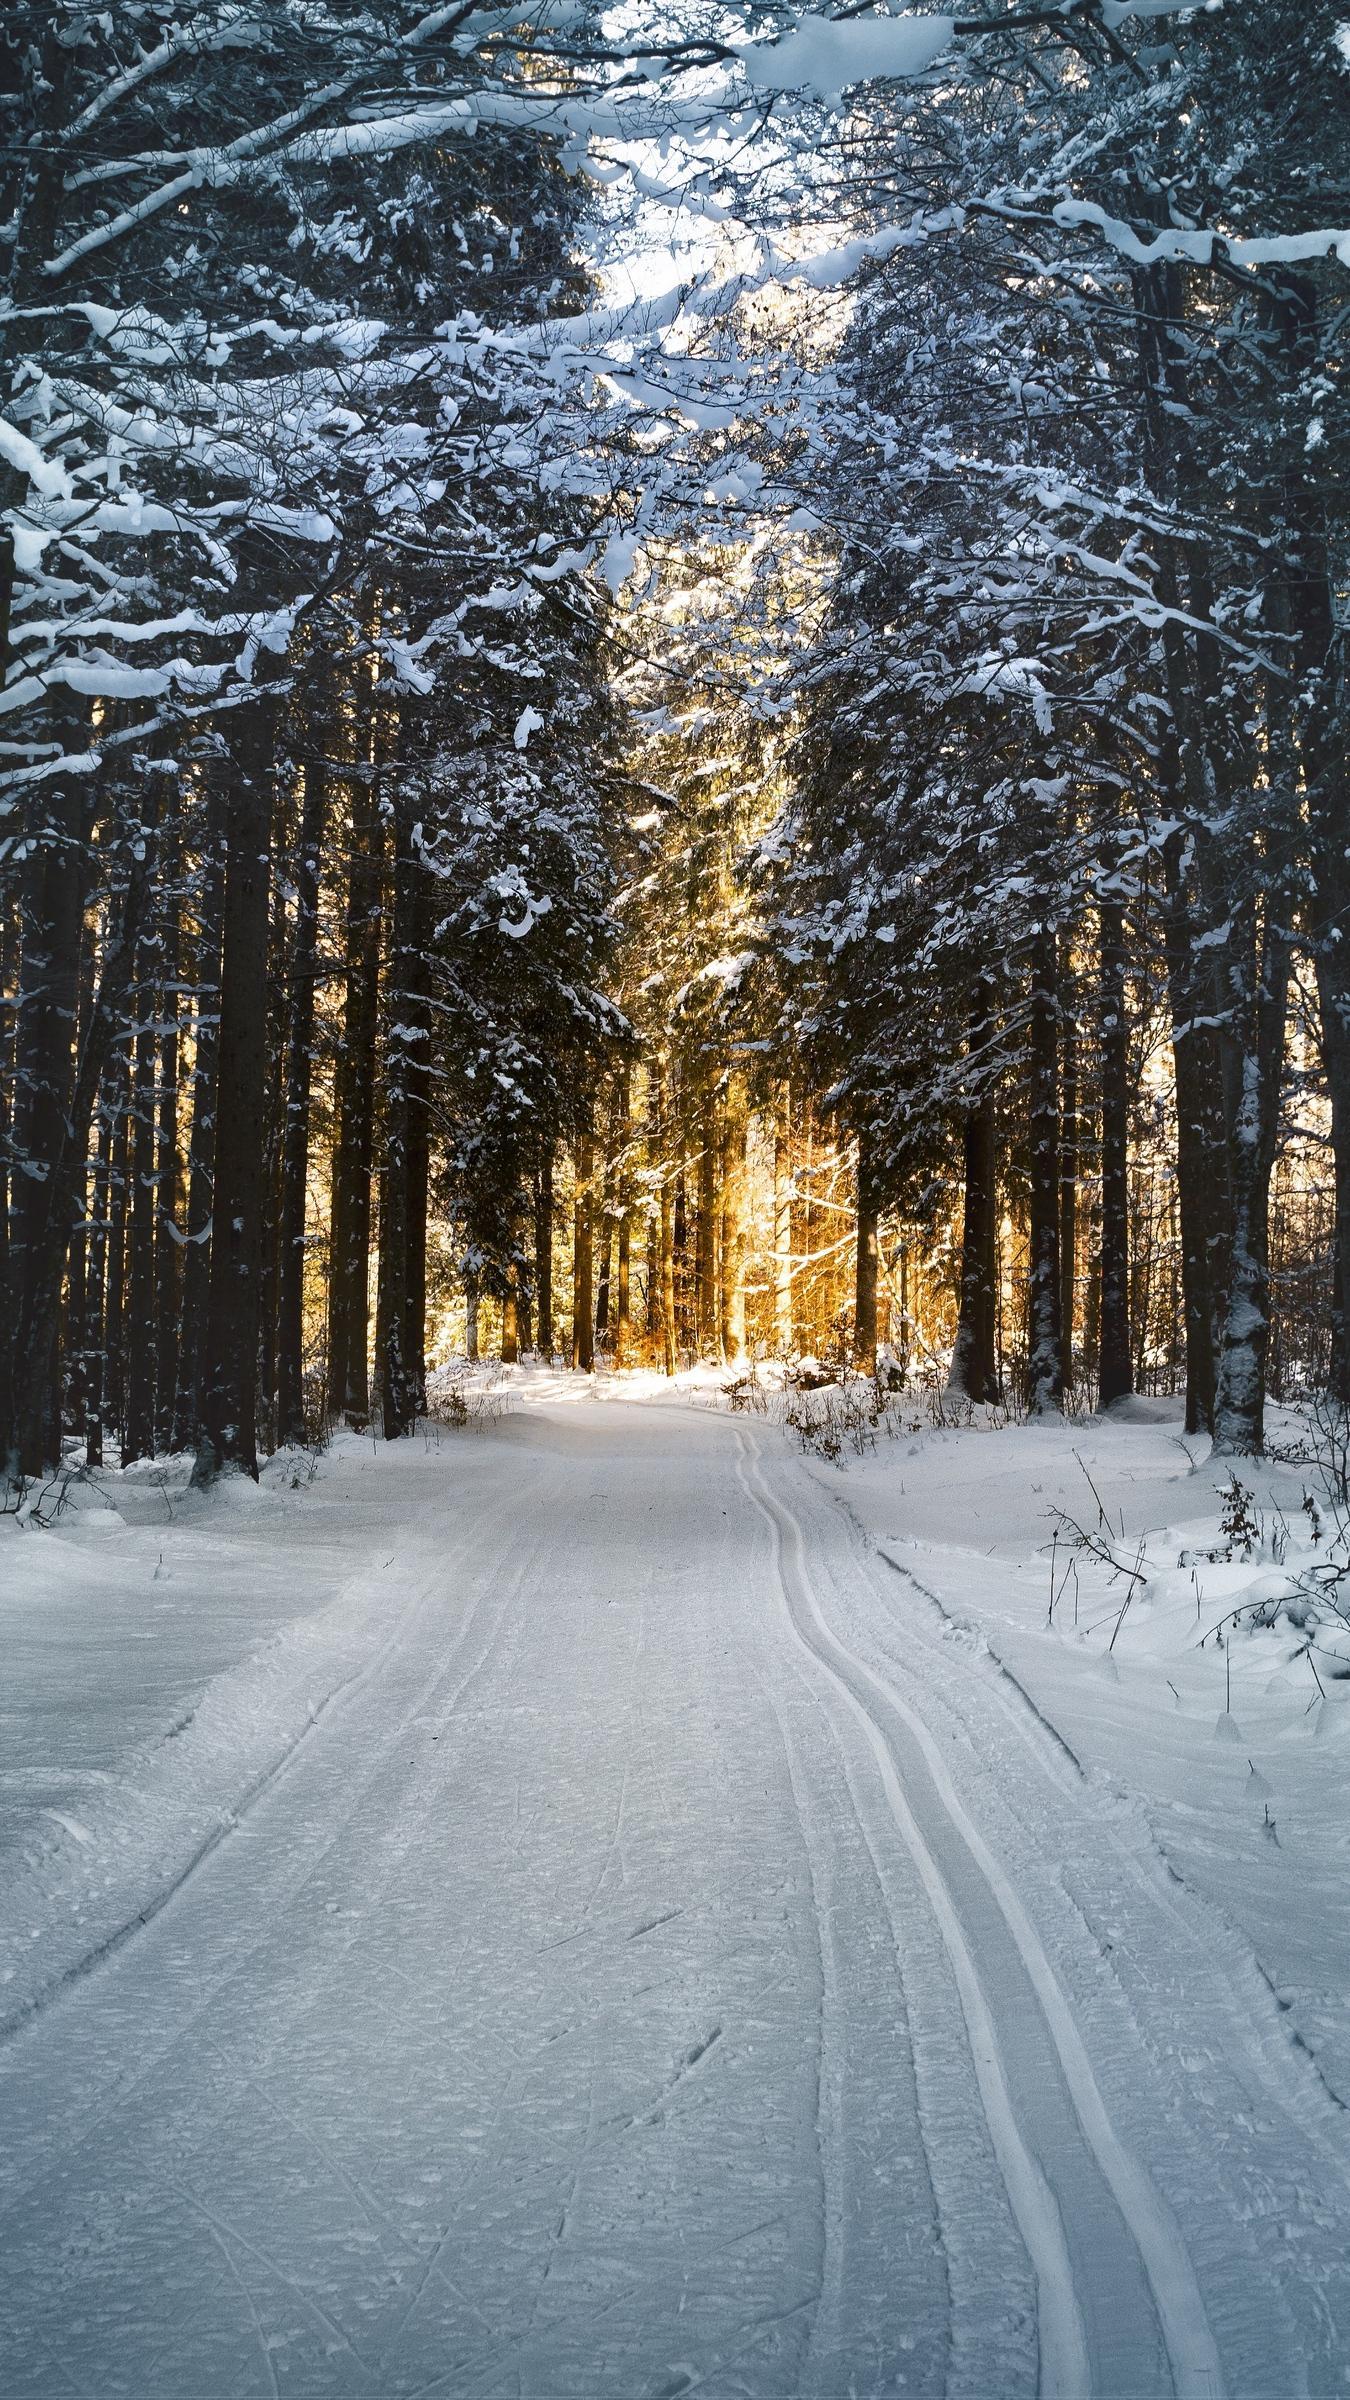 Download wallpaper 1350x2400 winter, trees, forest, road iphone 8+/7+/6s+/for parallax HD background